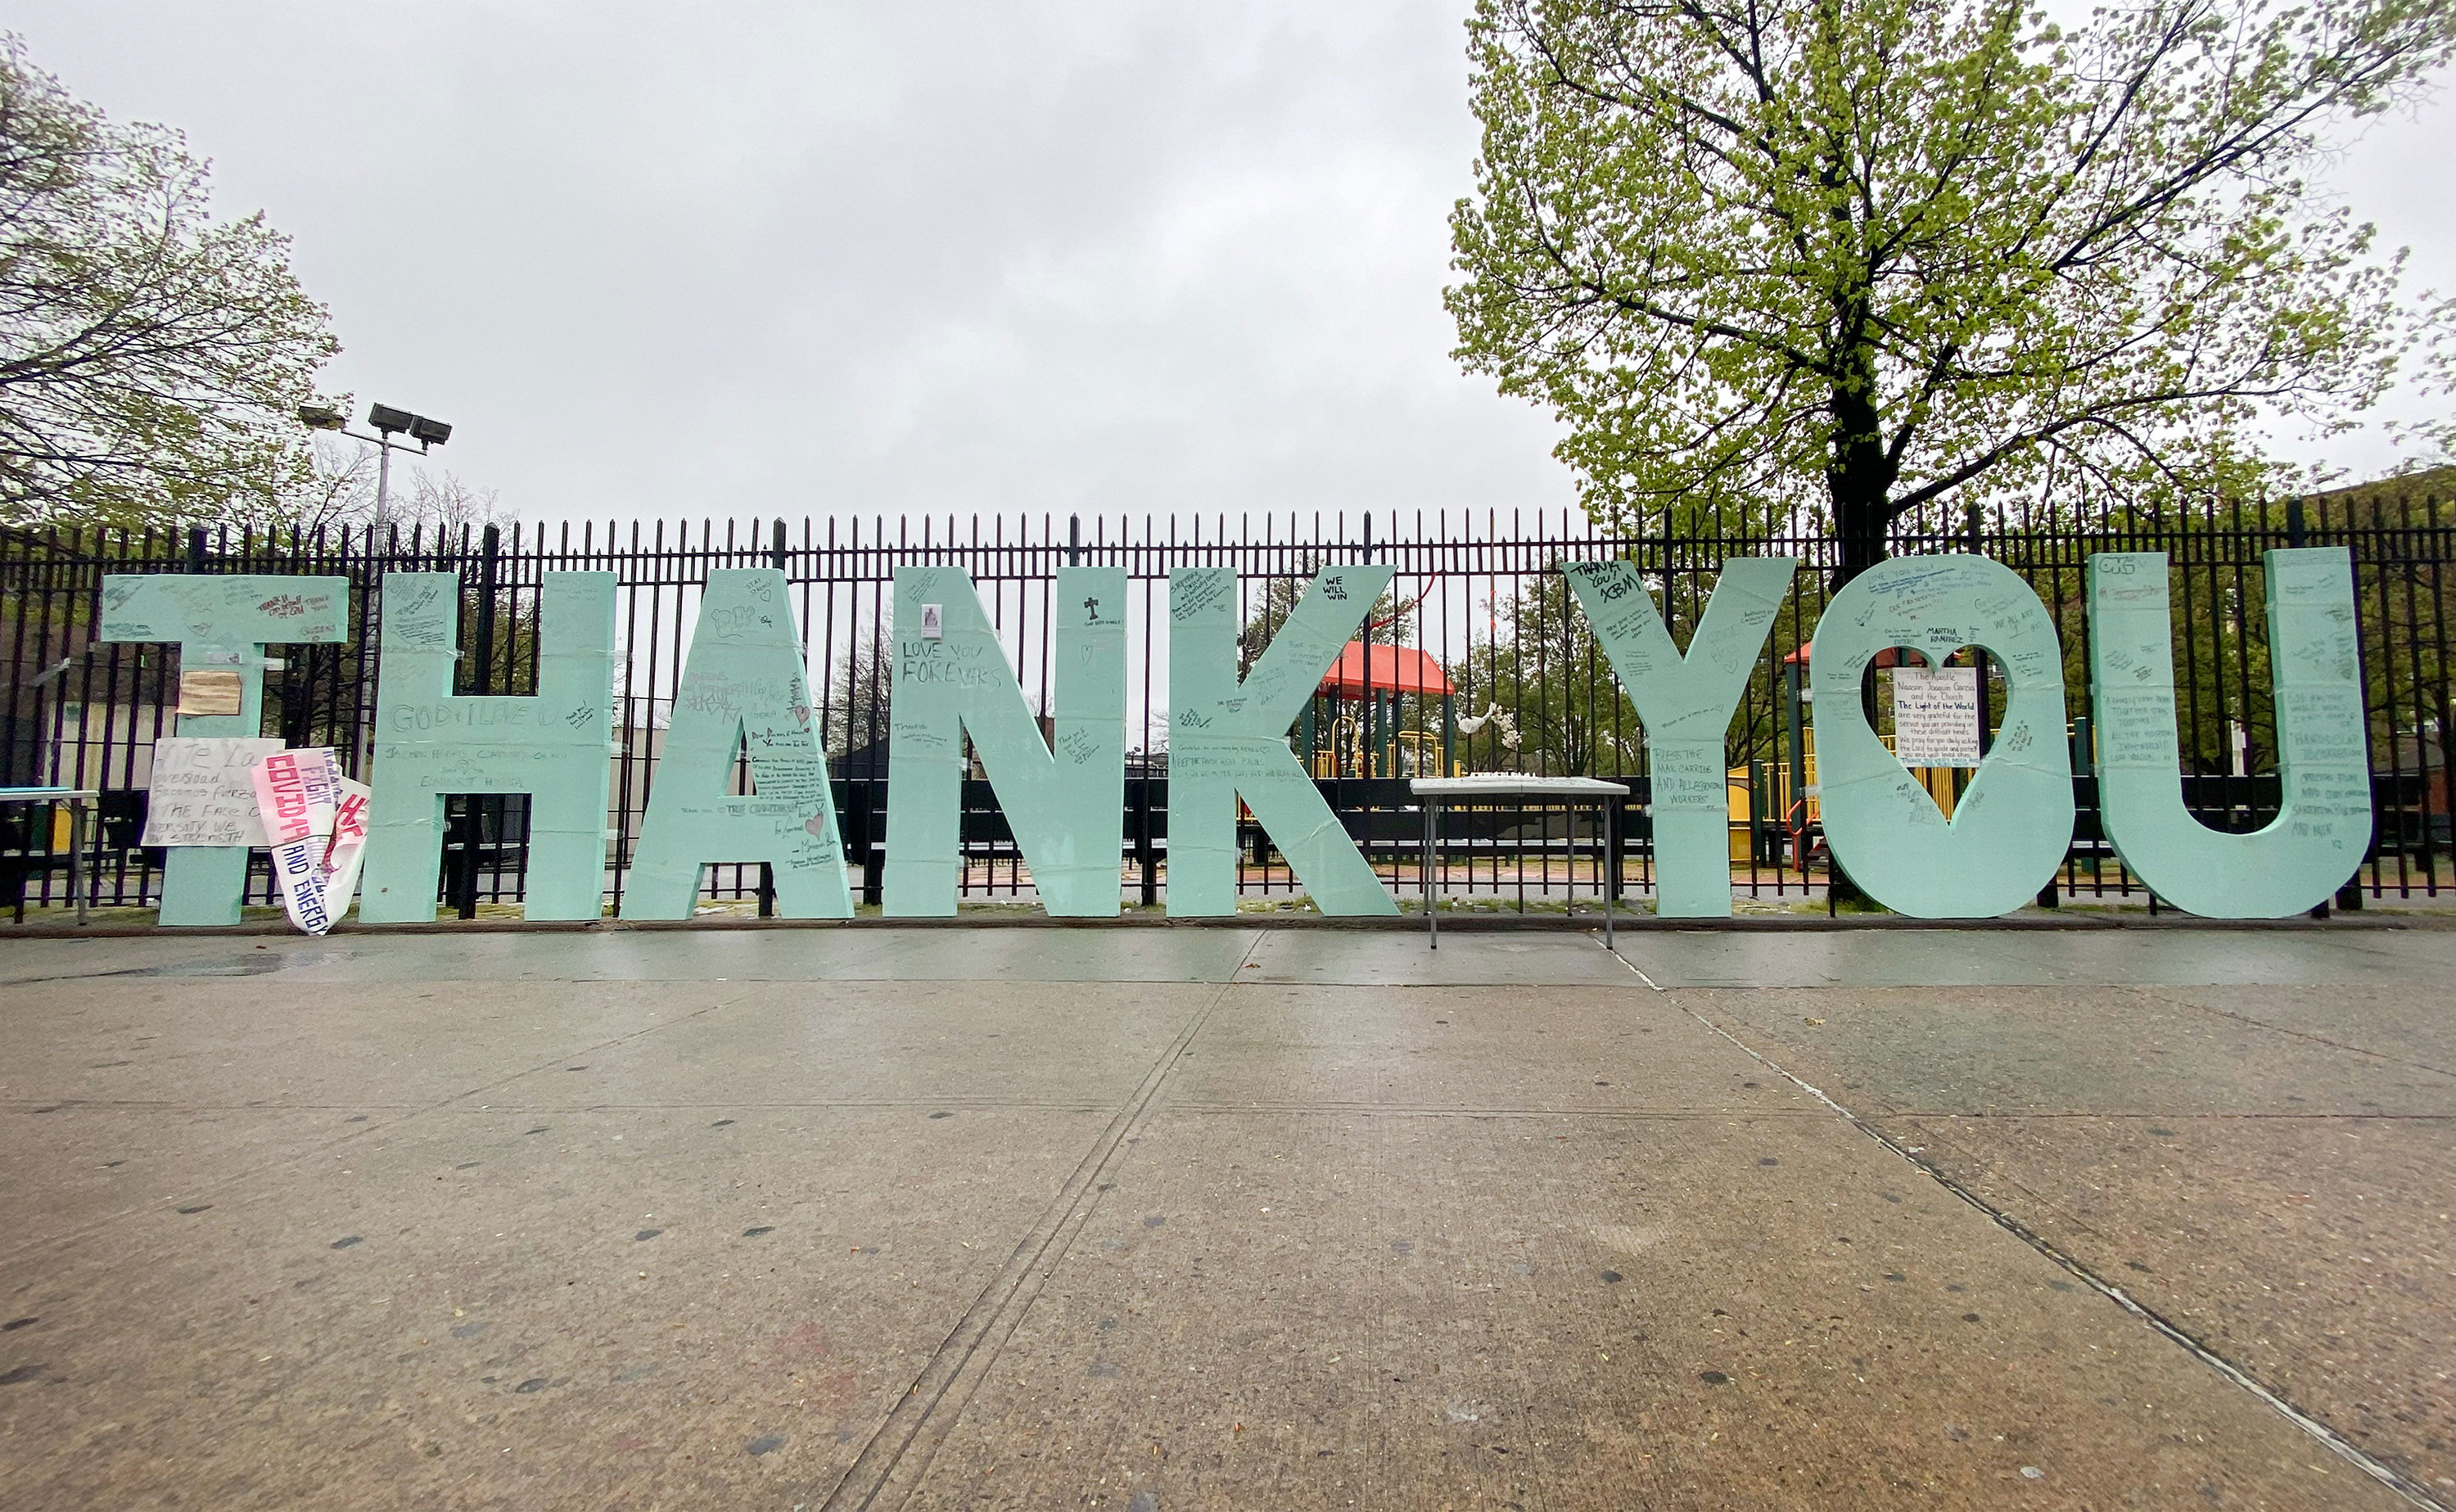 A Thank you sign for medical staff is seen outside of Elmhurst Hospital in New York on April 27..